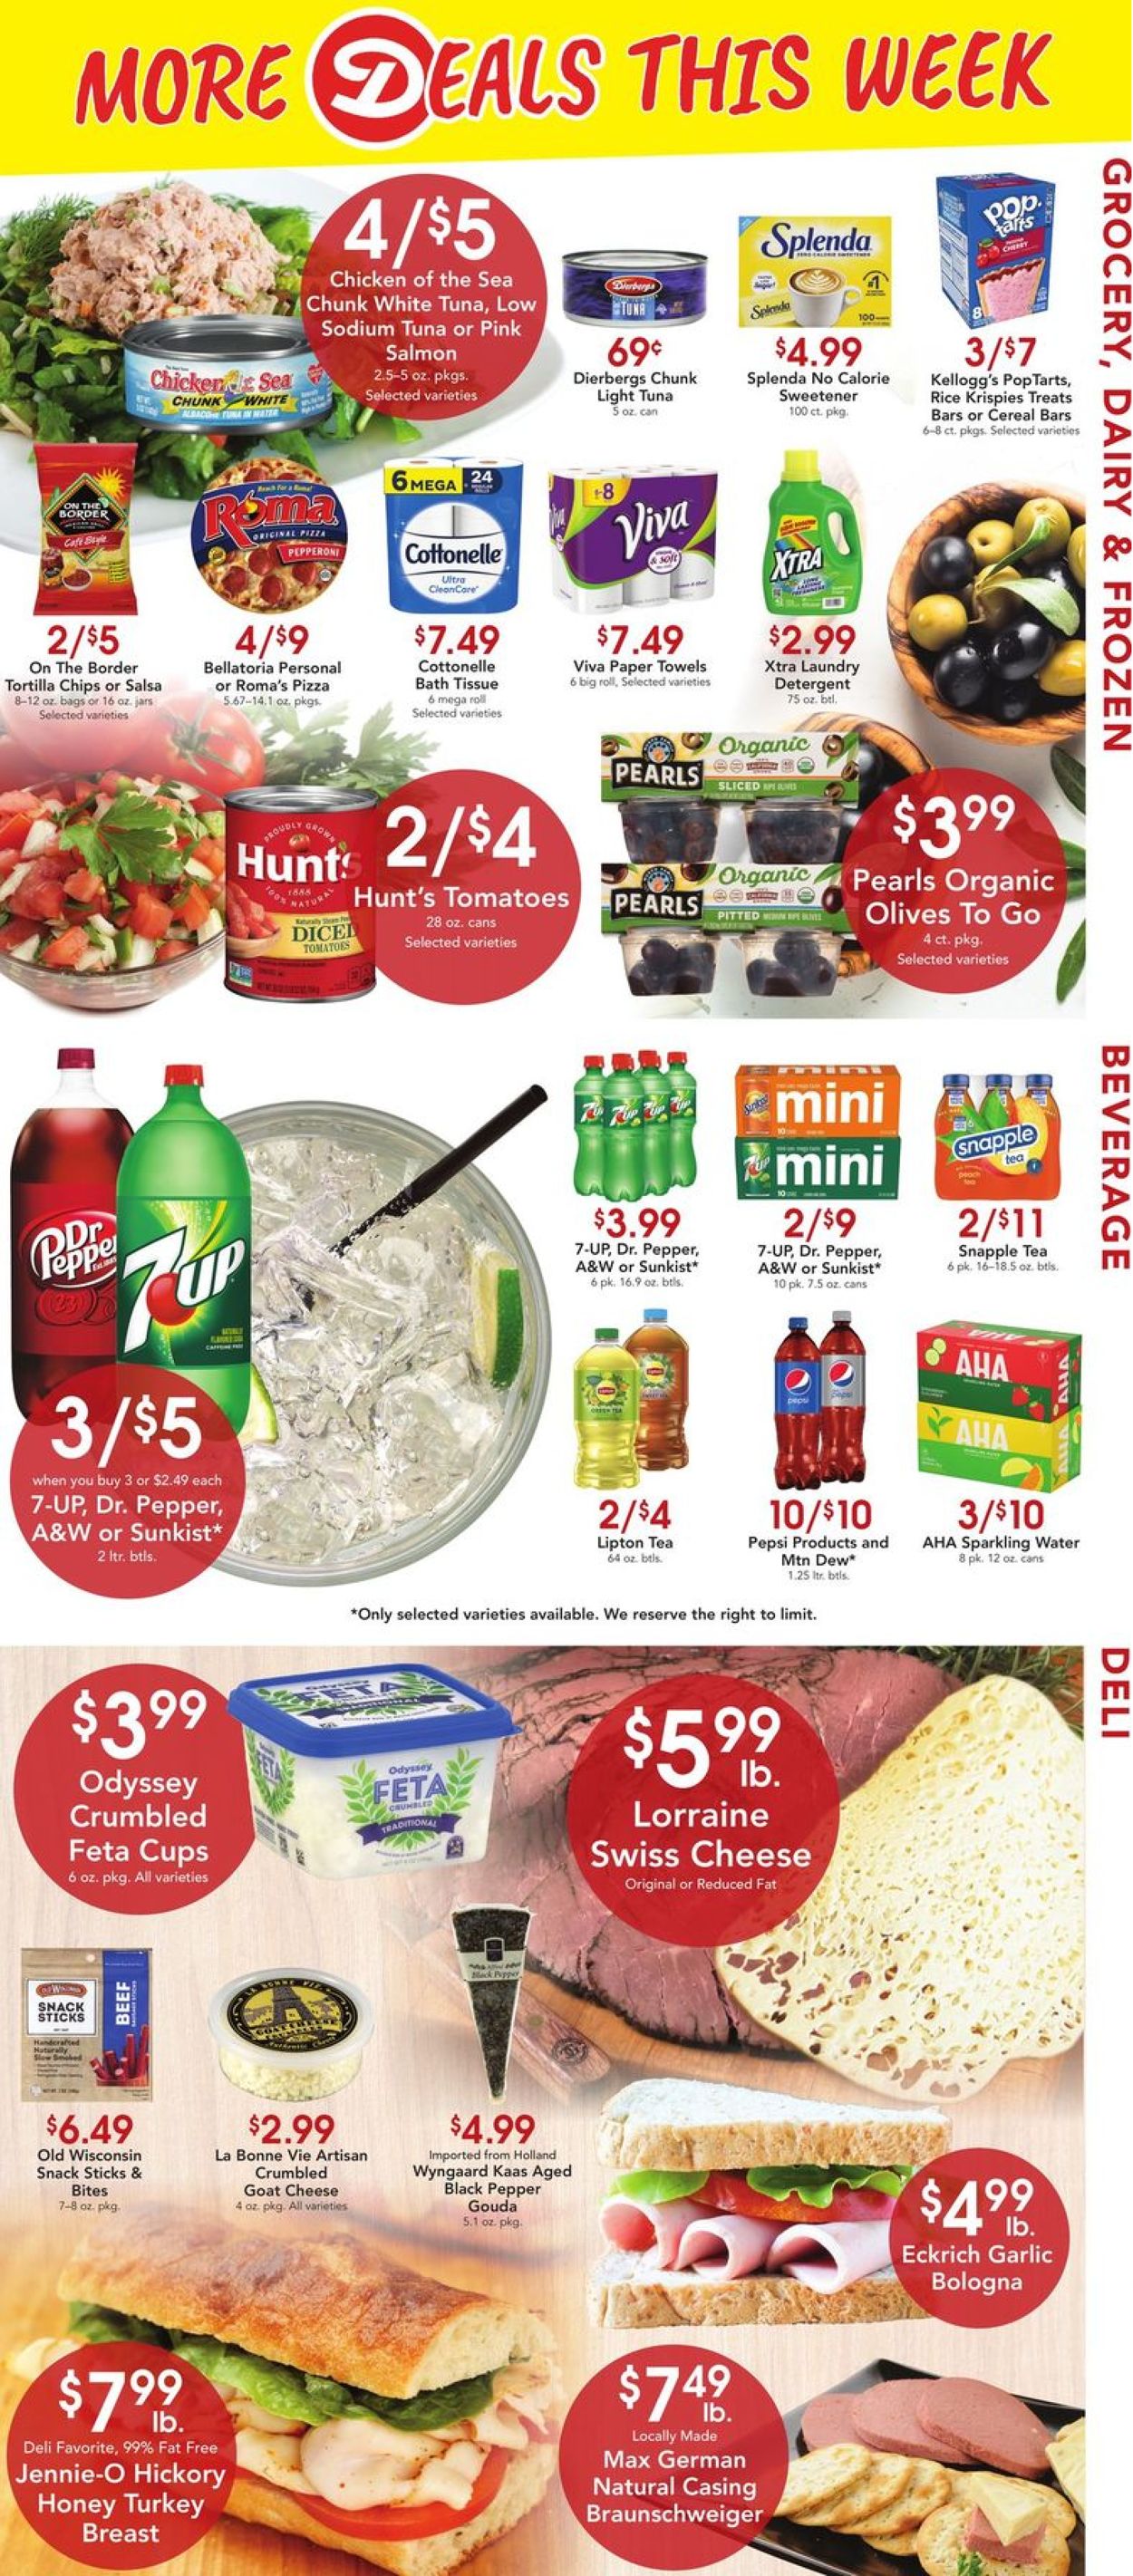 Dierbergs Ad from 01/04/2022